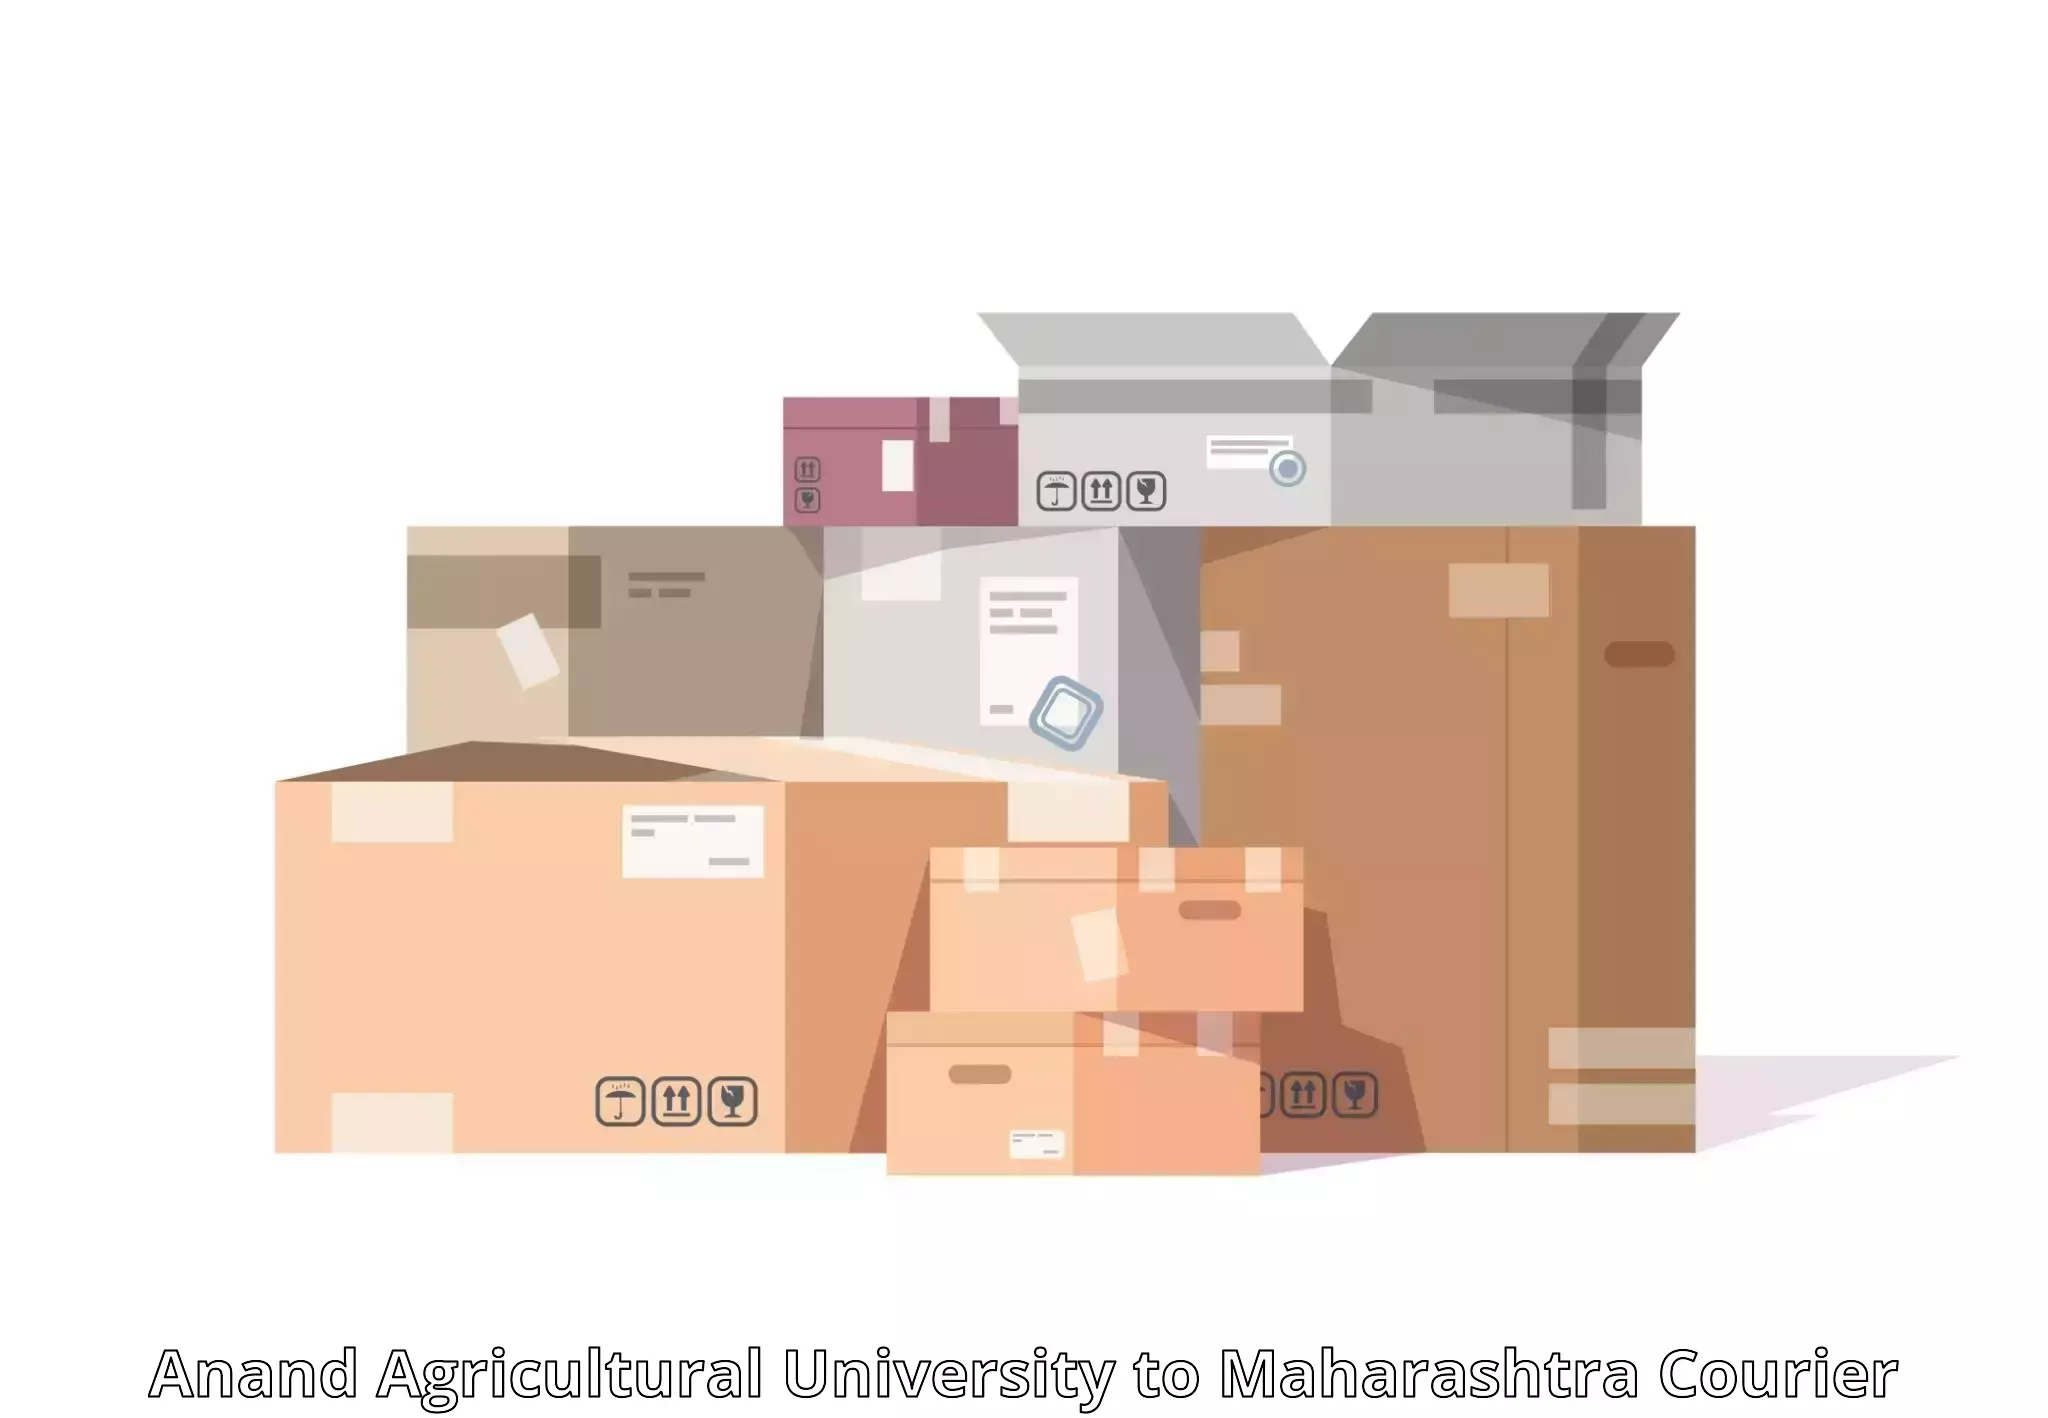 Express delivery network Anand Agricultural University to Wadki